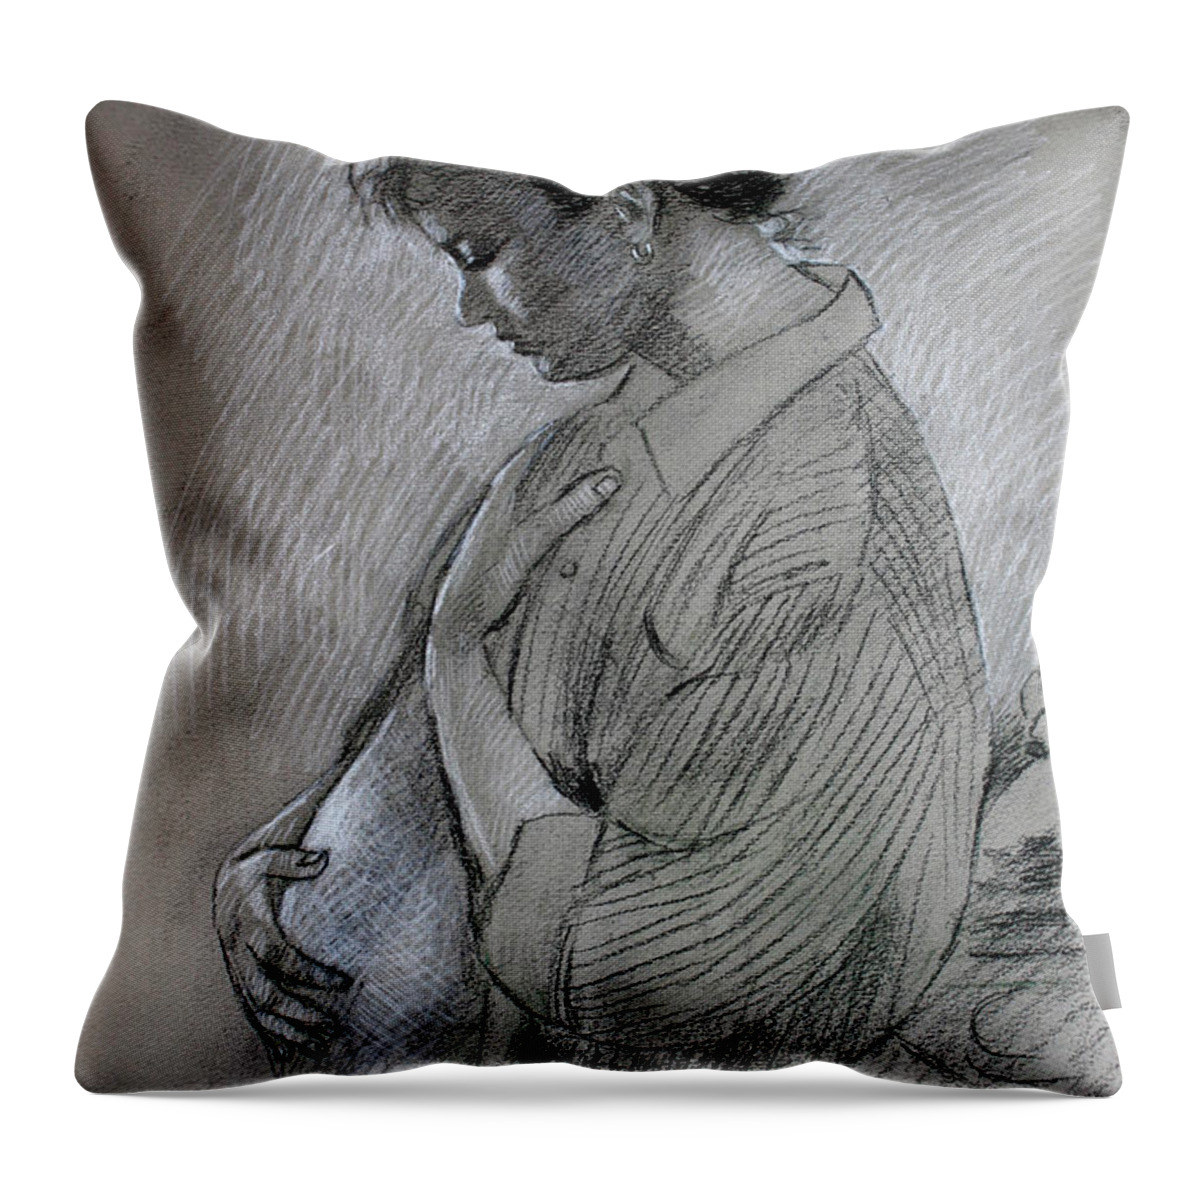 Pregnant Woman Throw Pillow featuring the drawing In the Family Way by Viola El